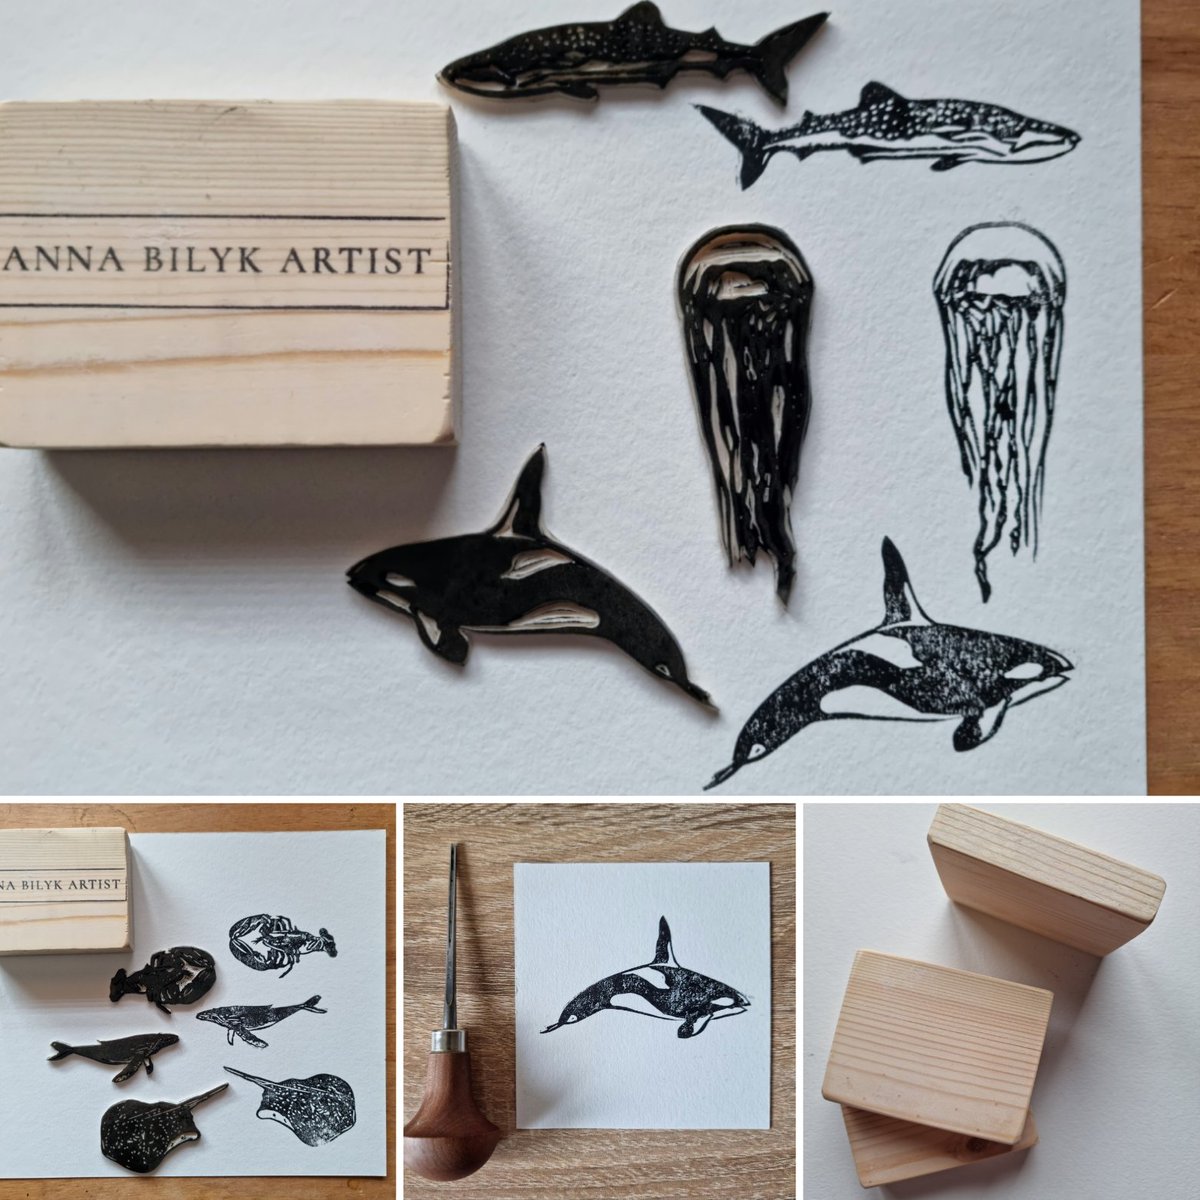 Morning #earlybiz - sealife lino stamps available. Each stamp is handcarved & perfect for #journaling #scrapbooking or just general stamp fun 🐋
annabilykartist.etsy.com 
#ukgiftam #ukgifthour #mhhsbd #shopindie #craft #etsyshop #print #Stamps #stampart #stamp #Artists